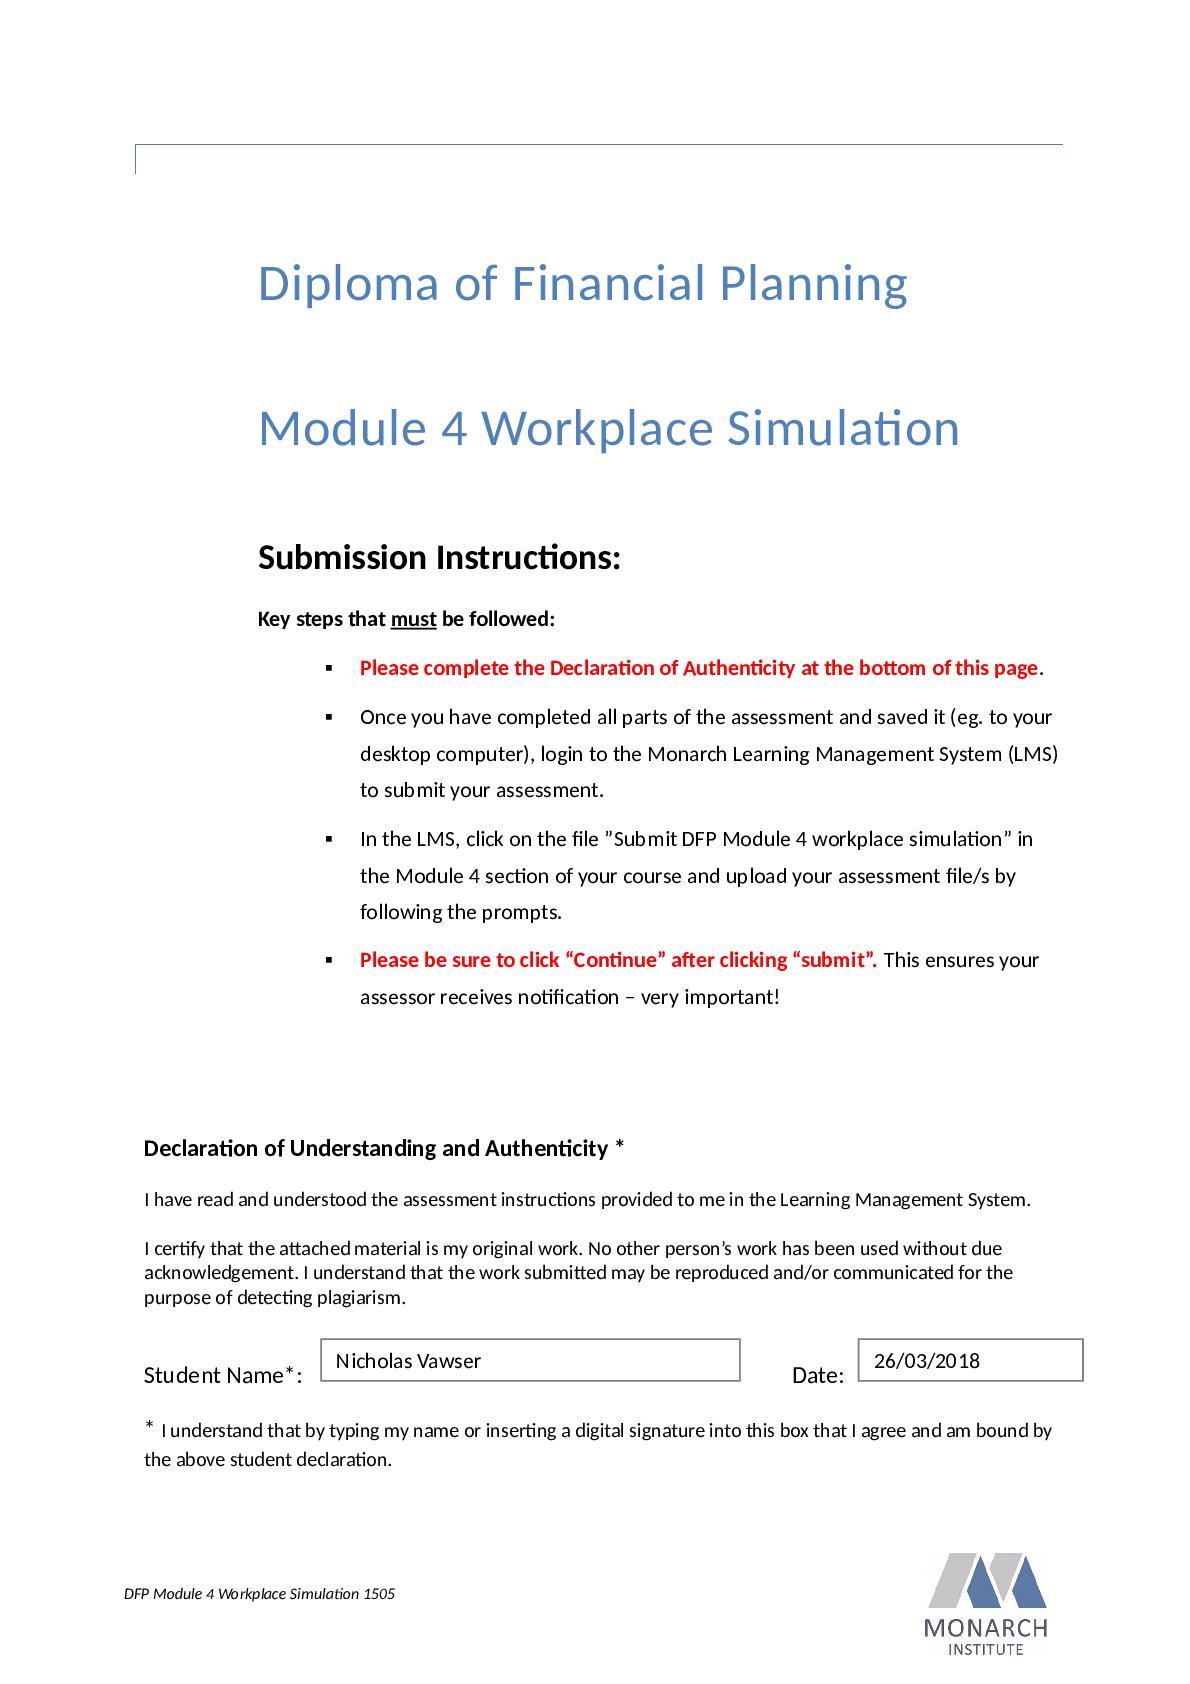 Diploma of Financial Planning Module 4 Workplace Simulation